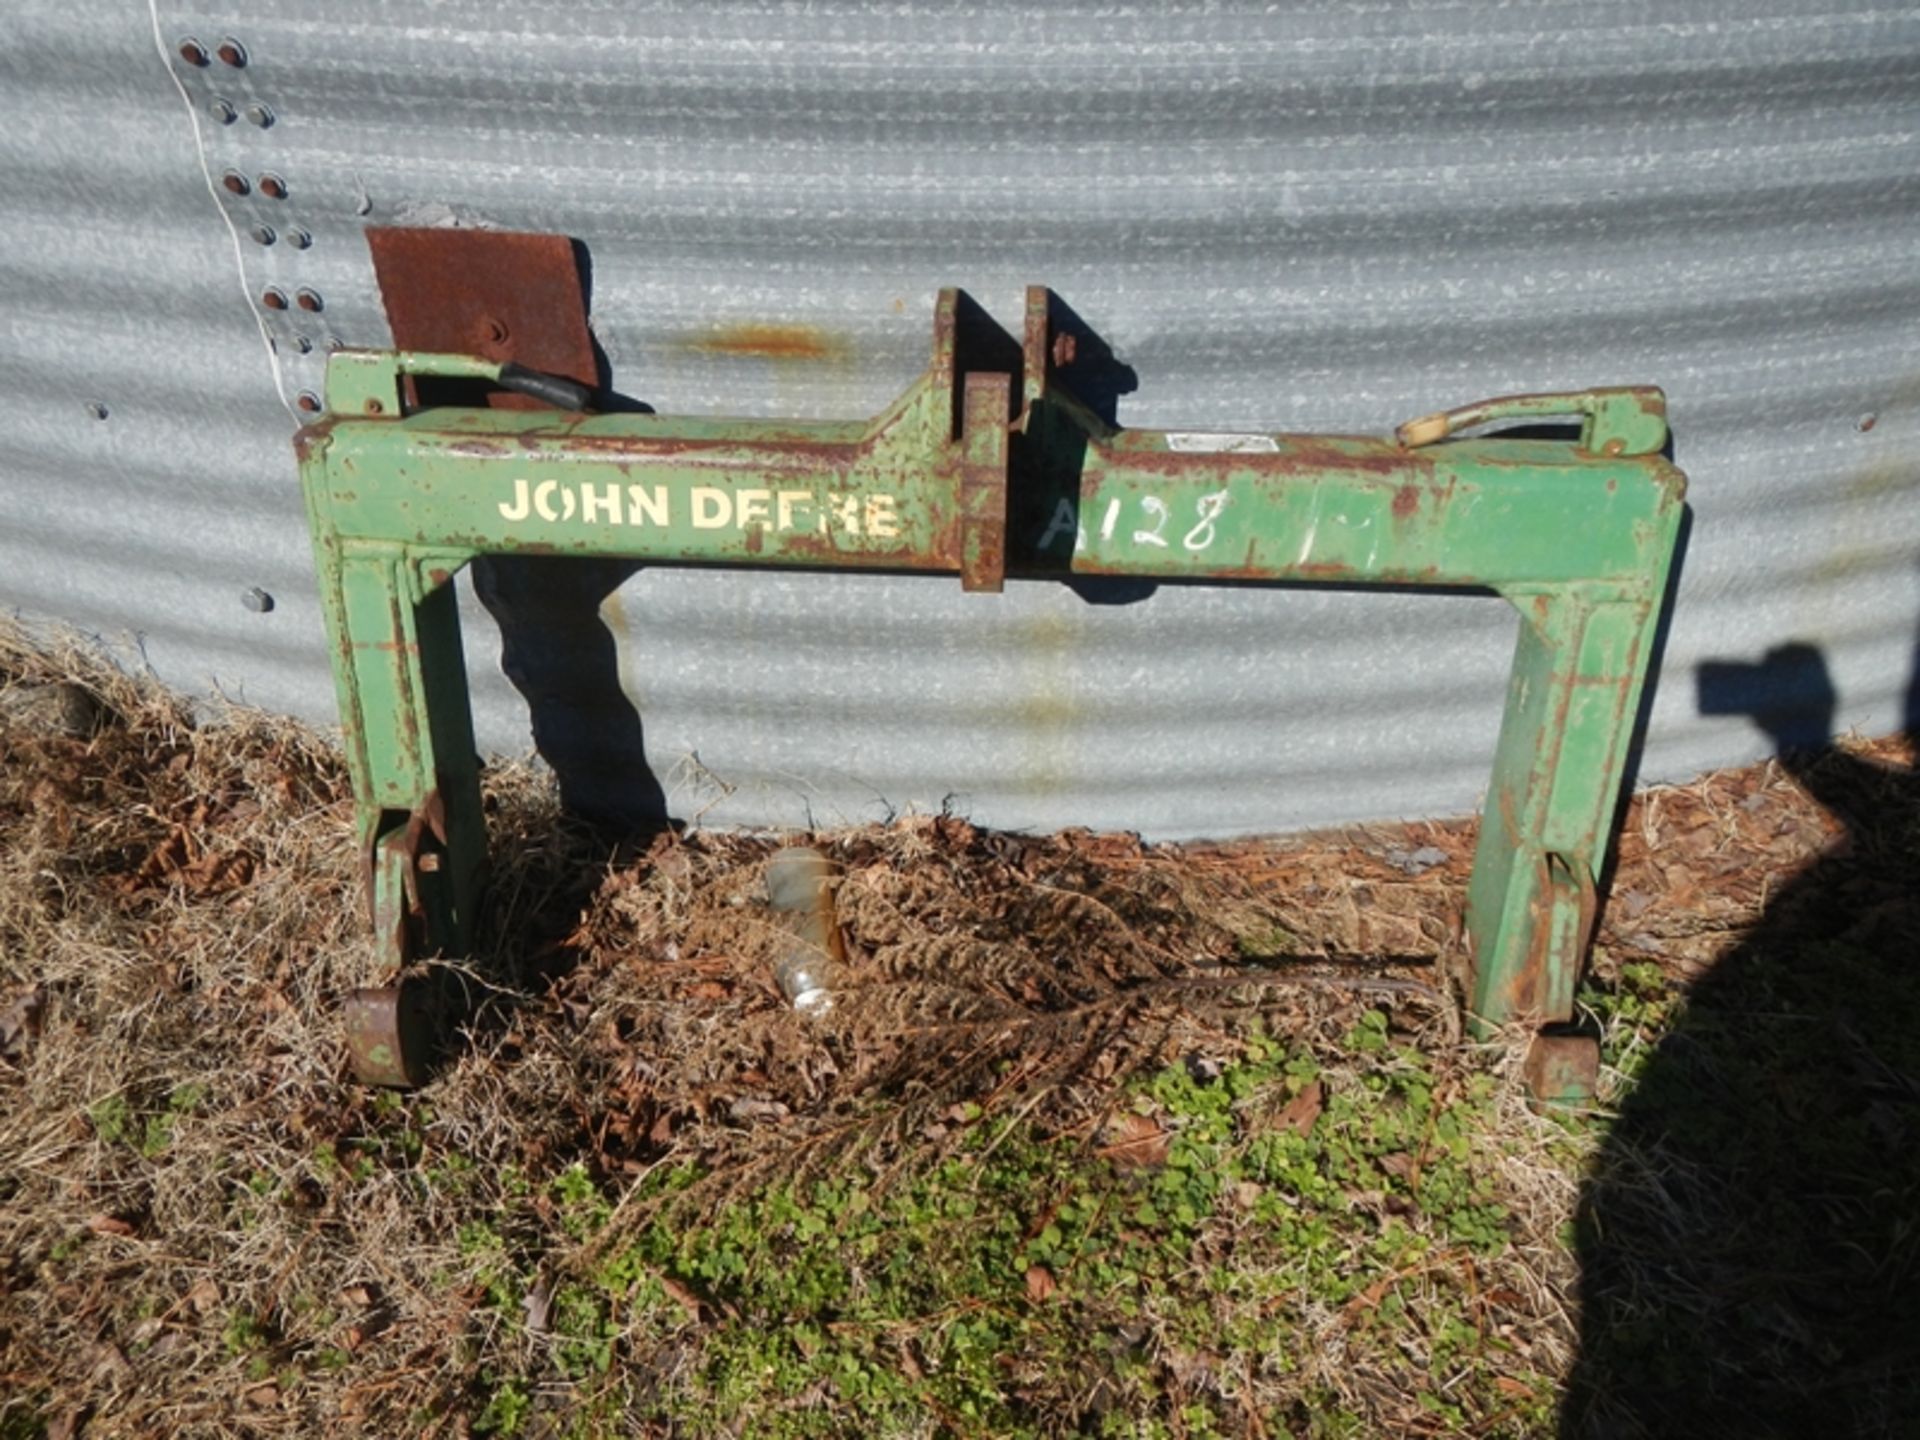 JD 4850 duals, weights, quick hitch, RW4850P002685 cannot read hours - Image 7 of 8